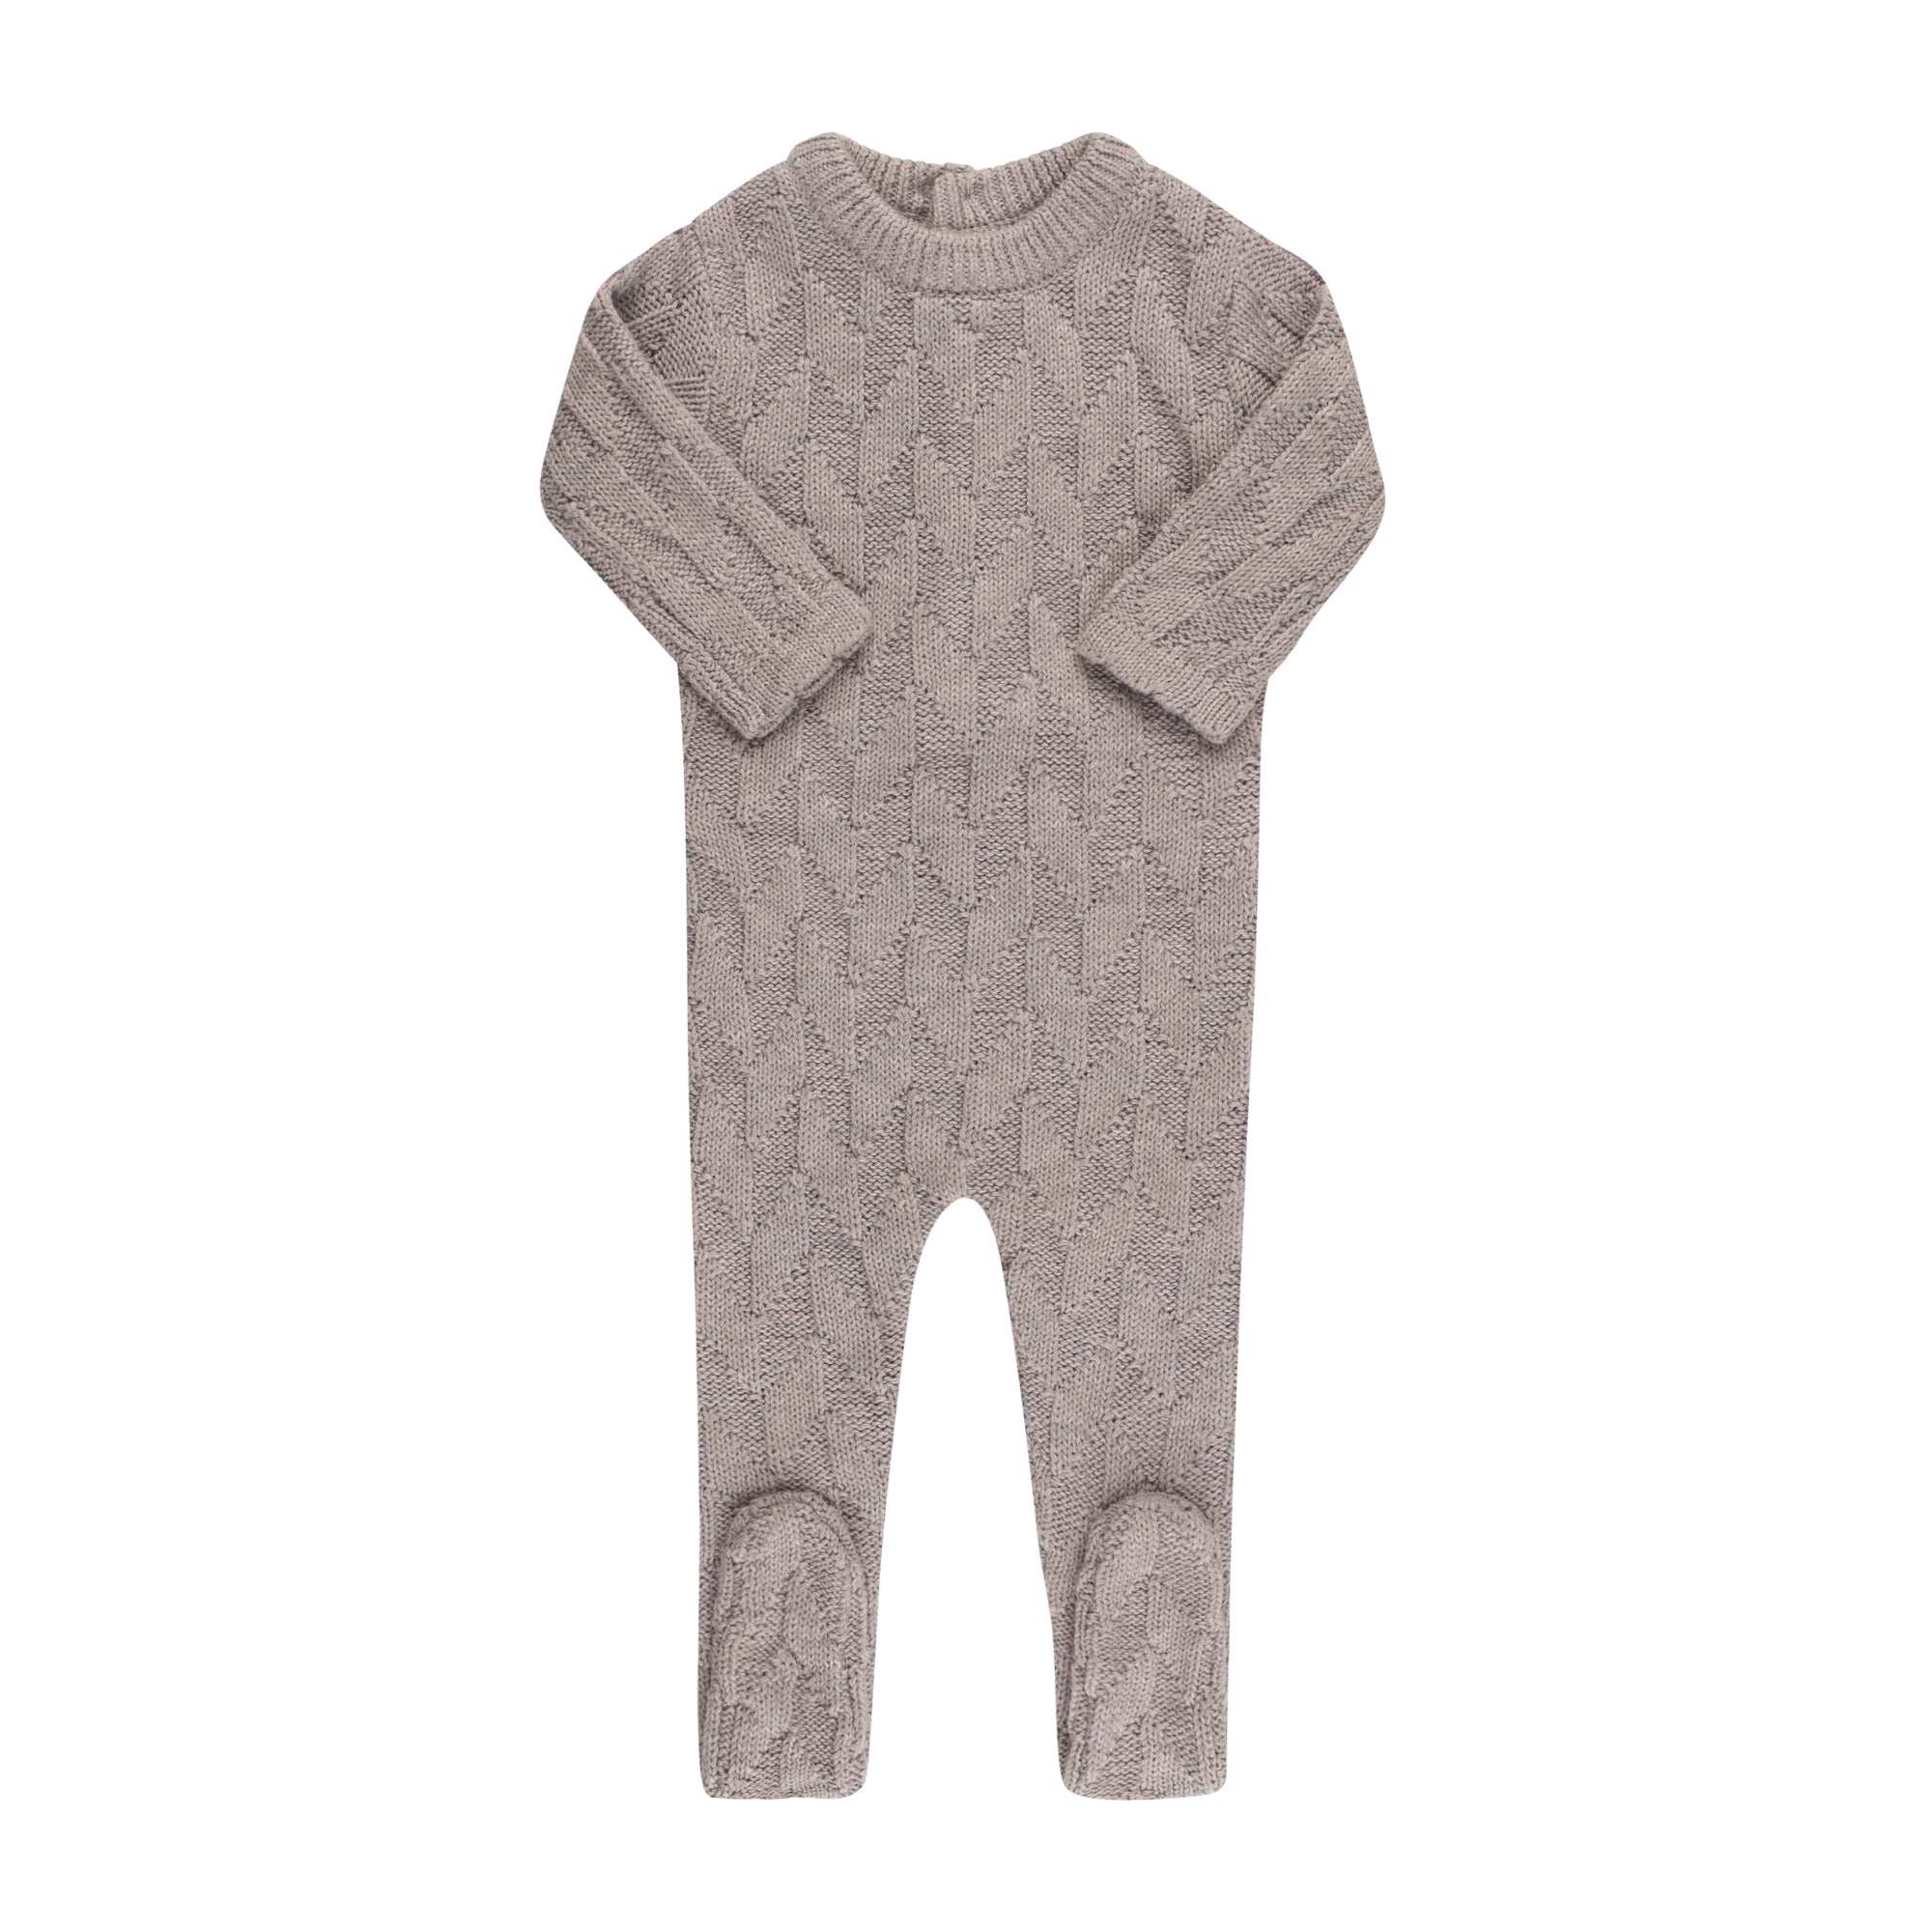 Pippin Jigsaw Knit Footie - Heather Dove